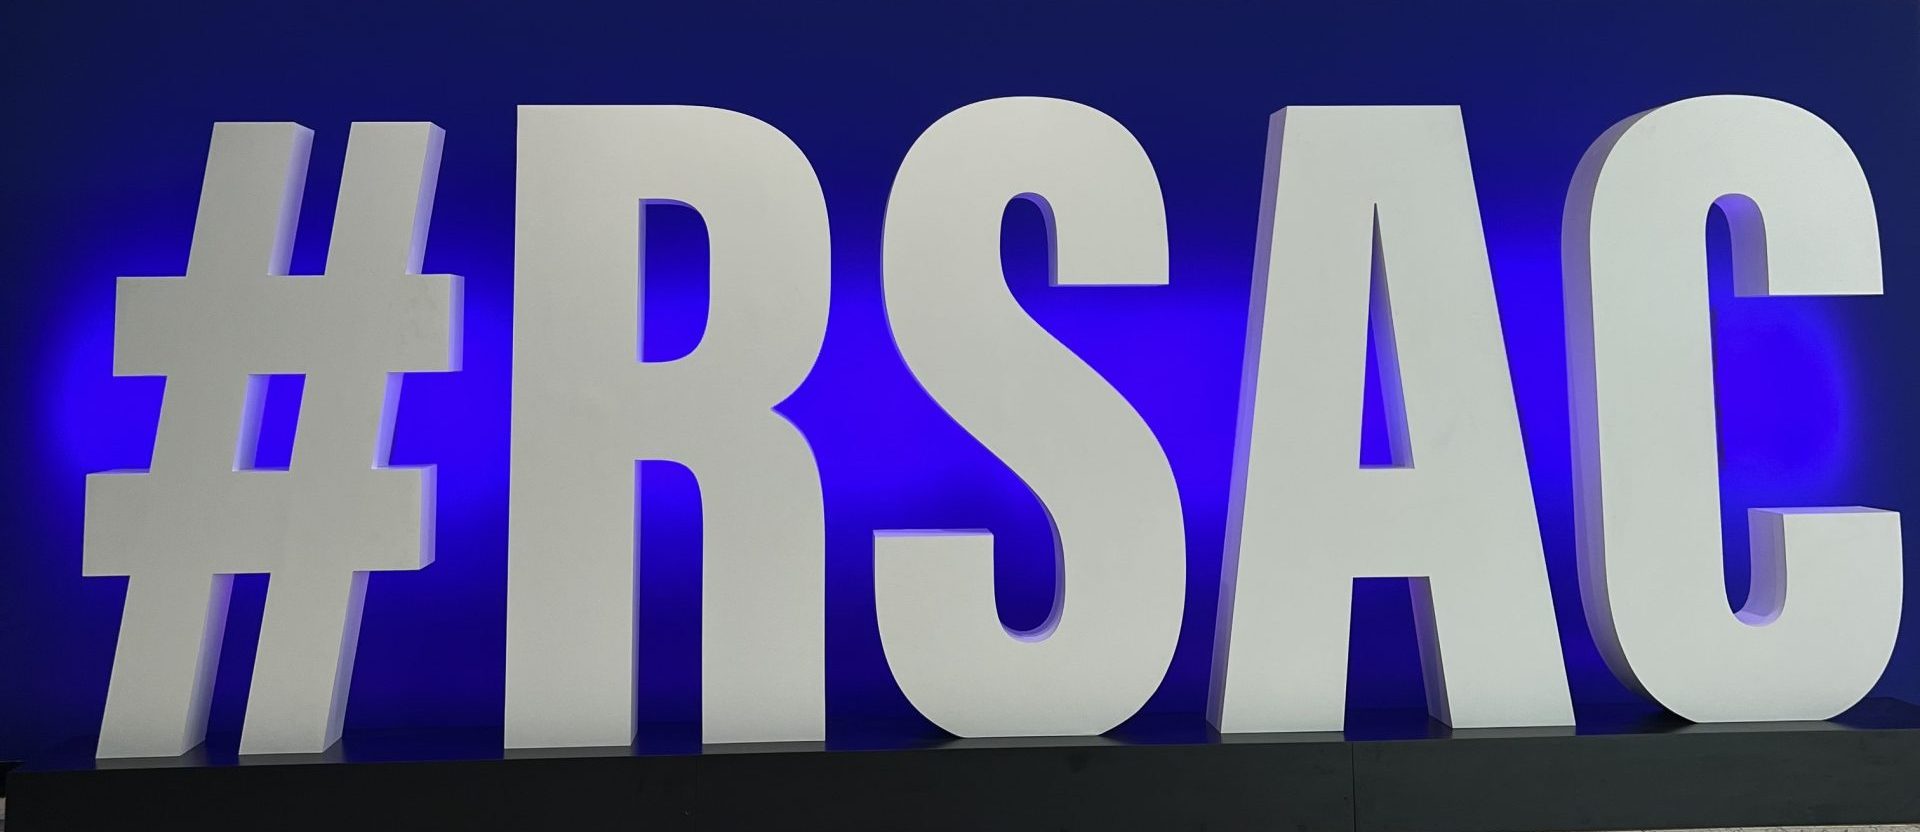 RSAC: Insights, Community and Cybersecurity Trends